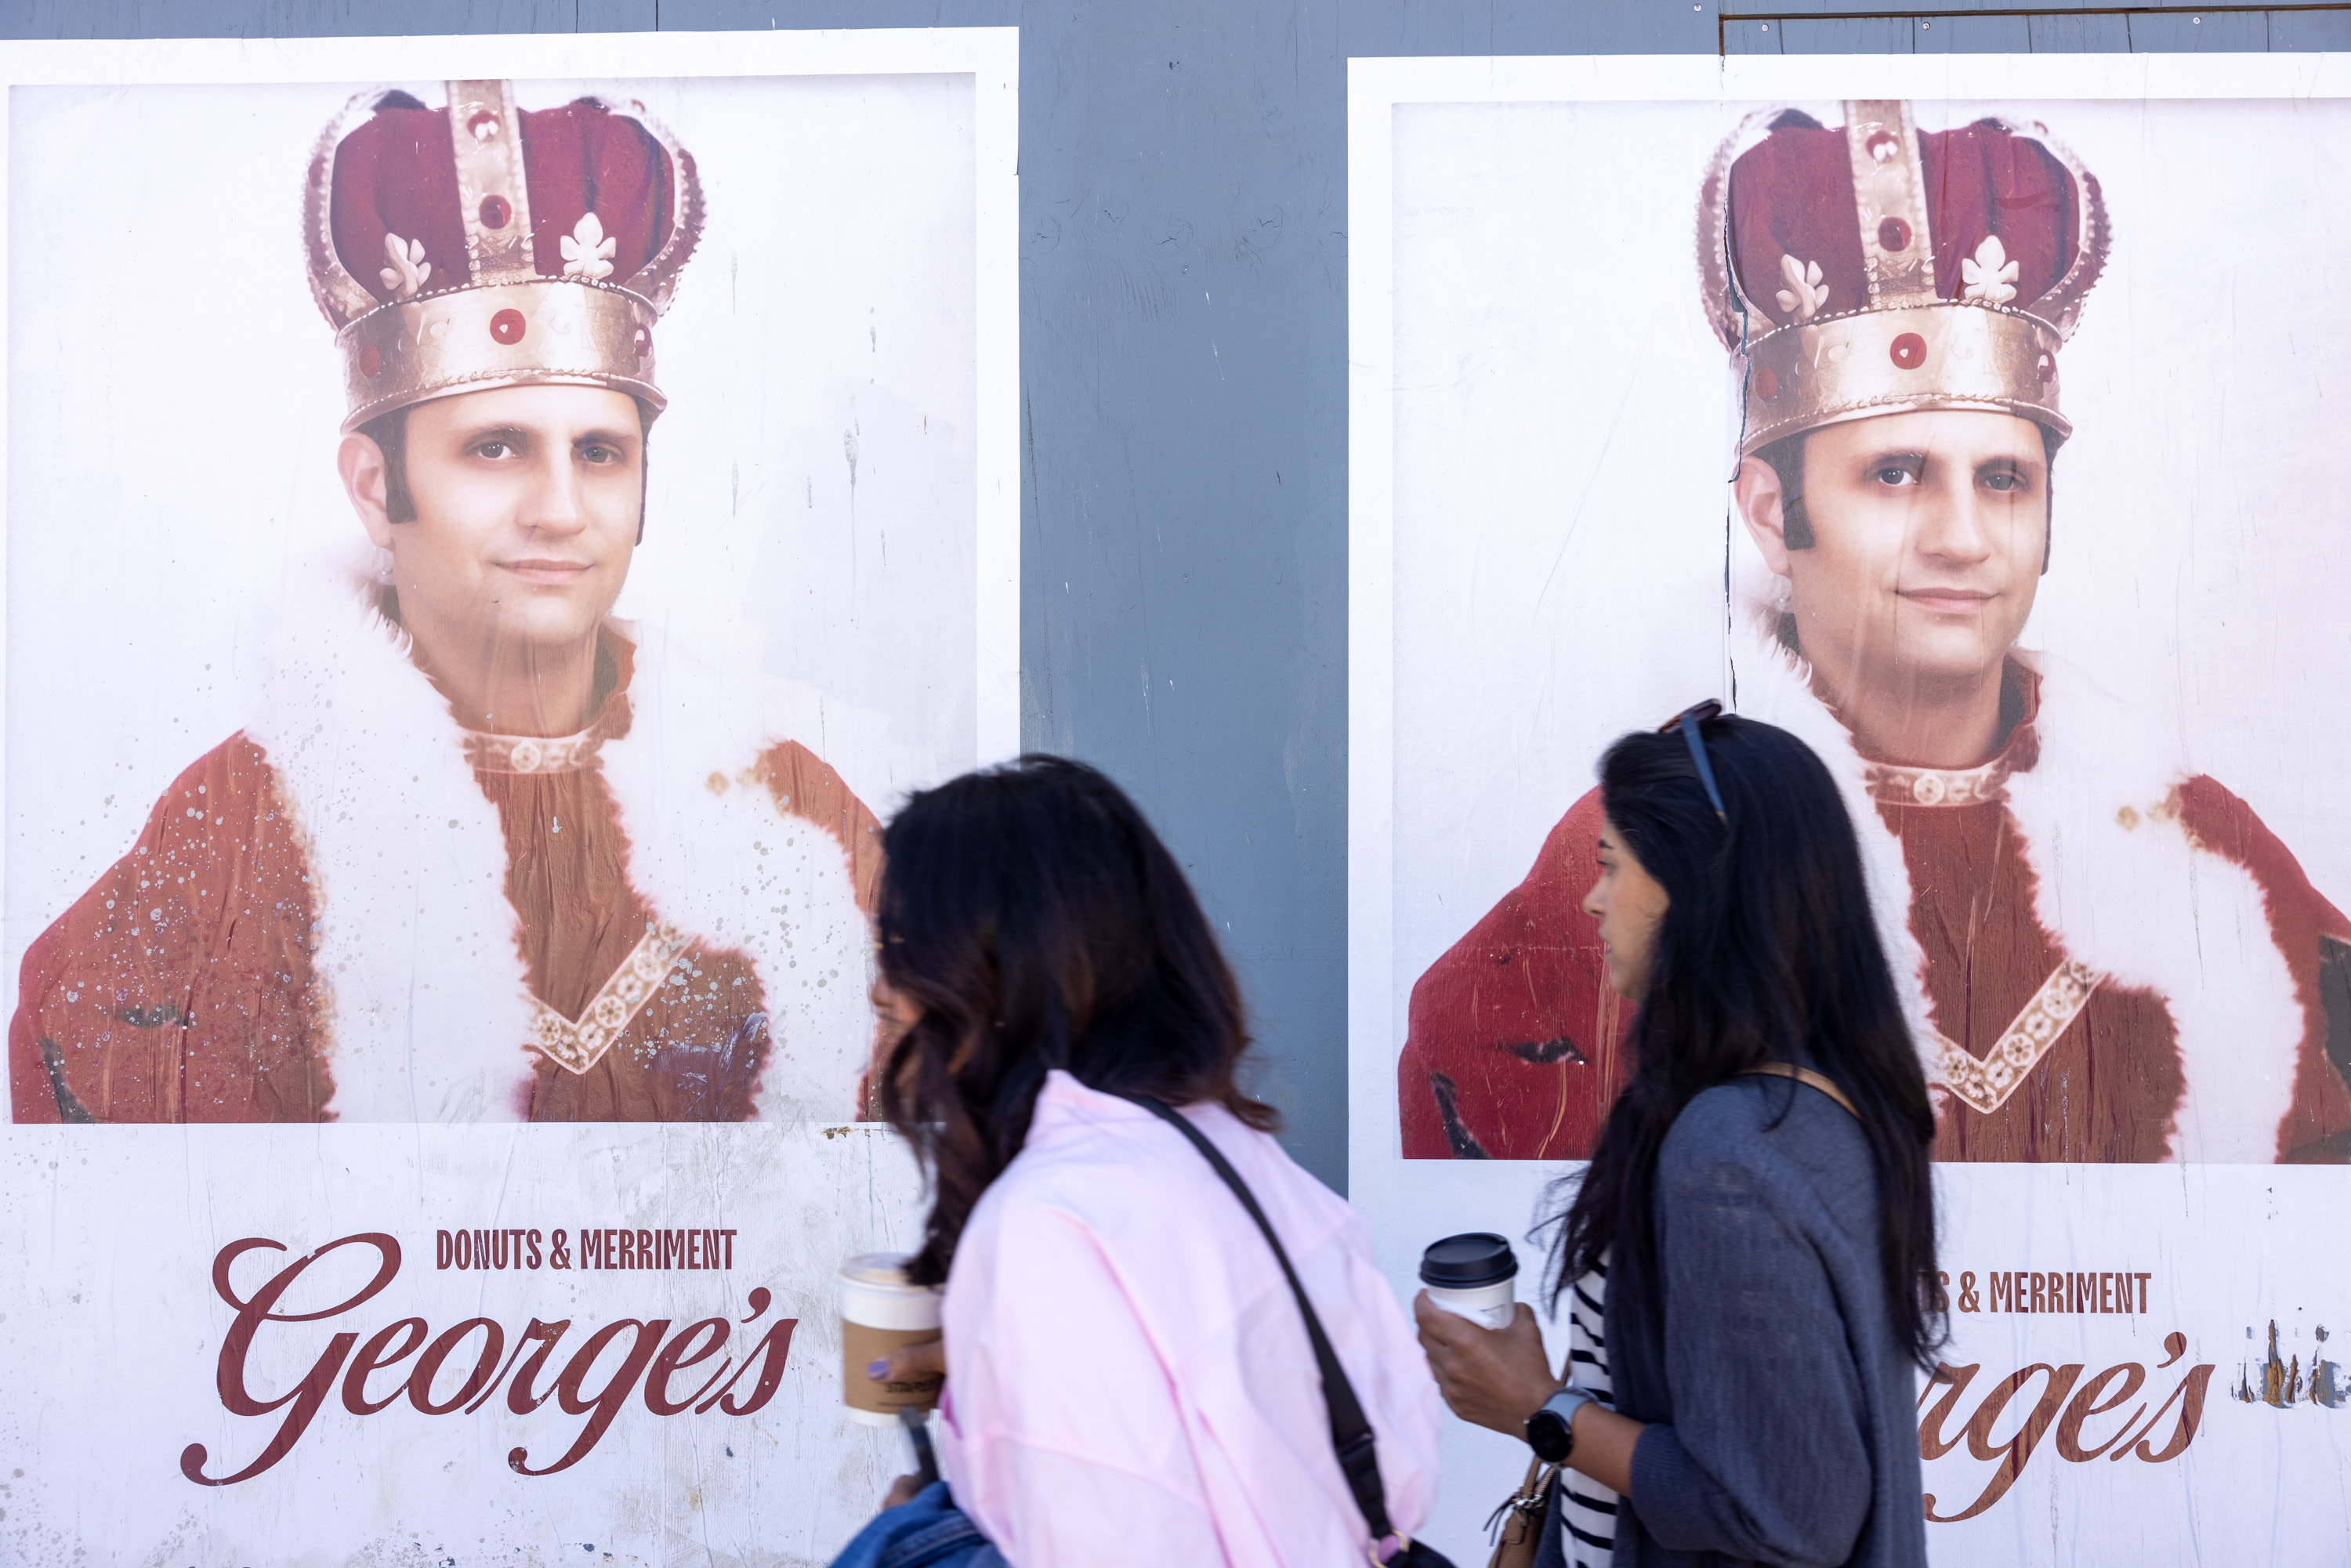 The image shows two women walking past posters of a man dressed as a king, advertising George's Donuts &amp; Merriment. Each woman is holding a drink in her hand.